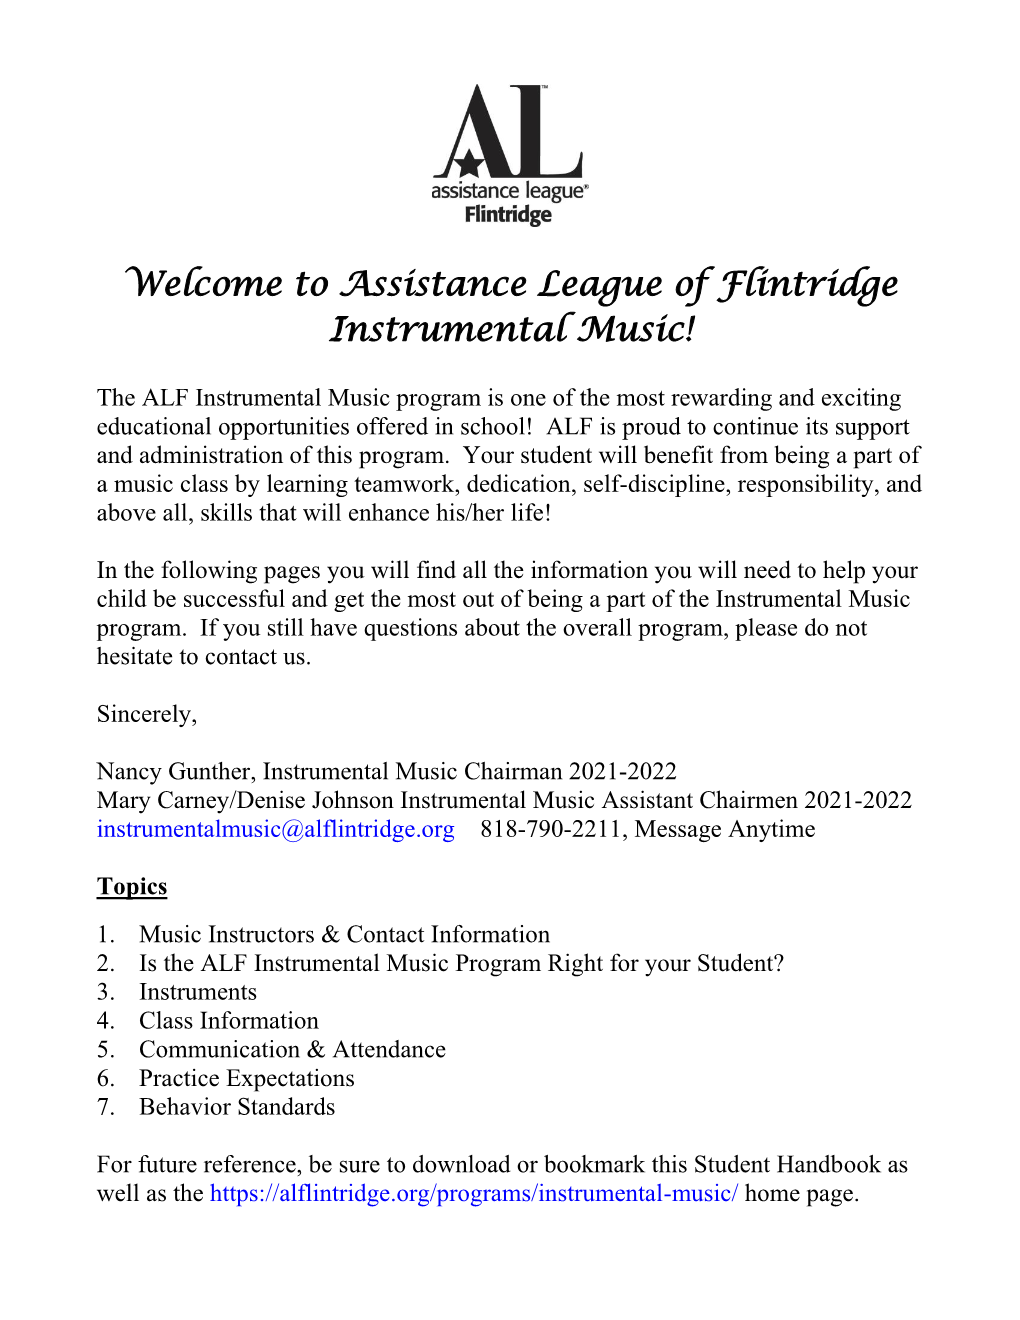 Welcome to Assistance League of Flintridge Instrumental Music!